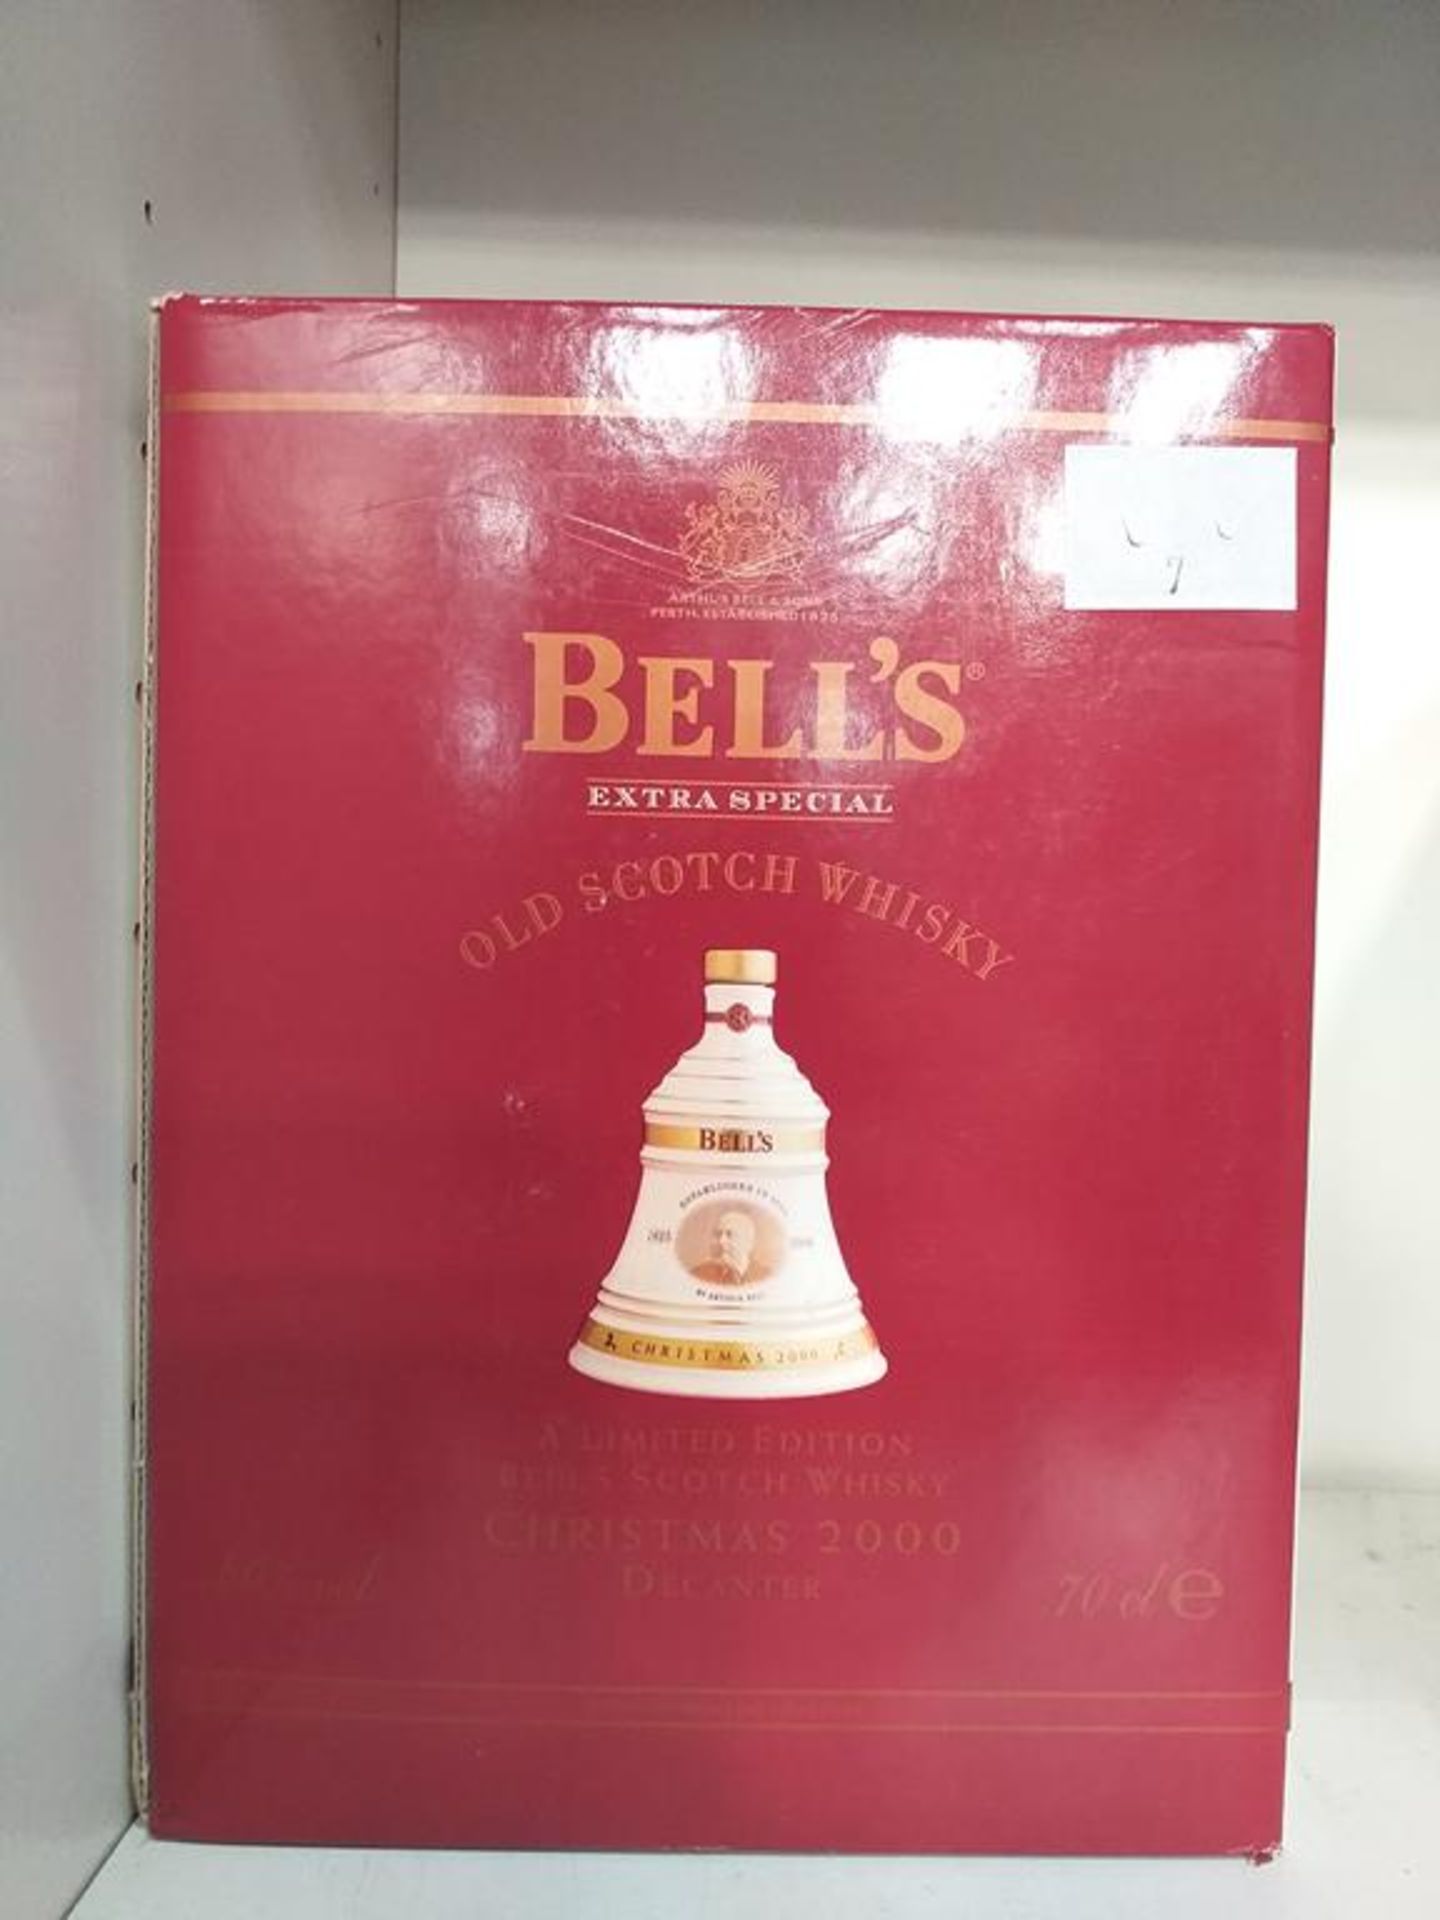 Two Bell's Extra Special Old Scotch Whisky limited edition Christmas 2000 Decanters - Image 5 of 5